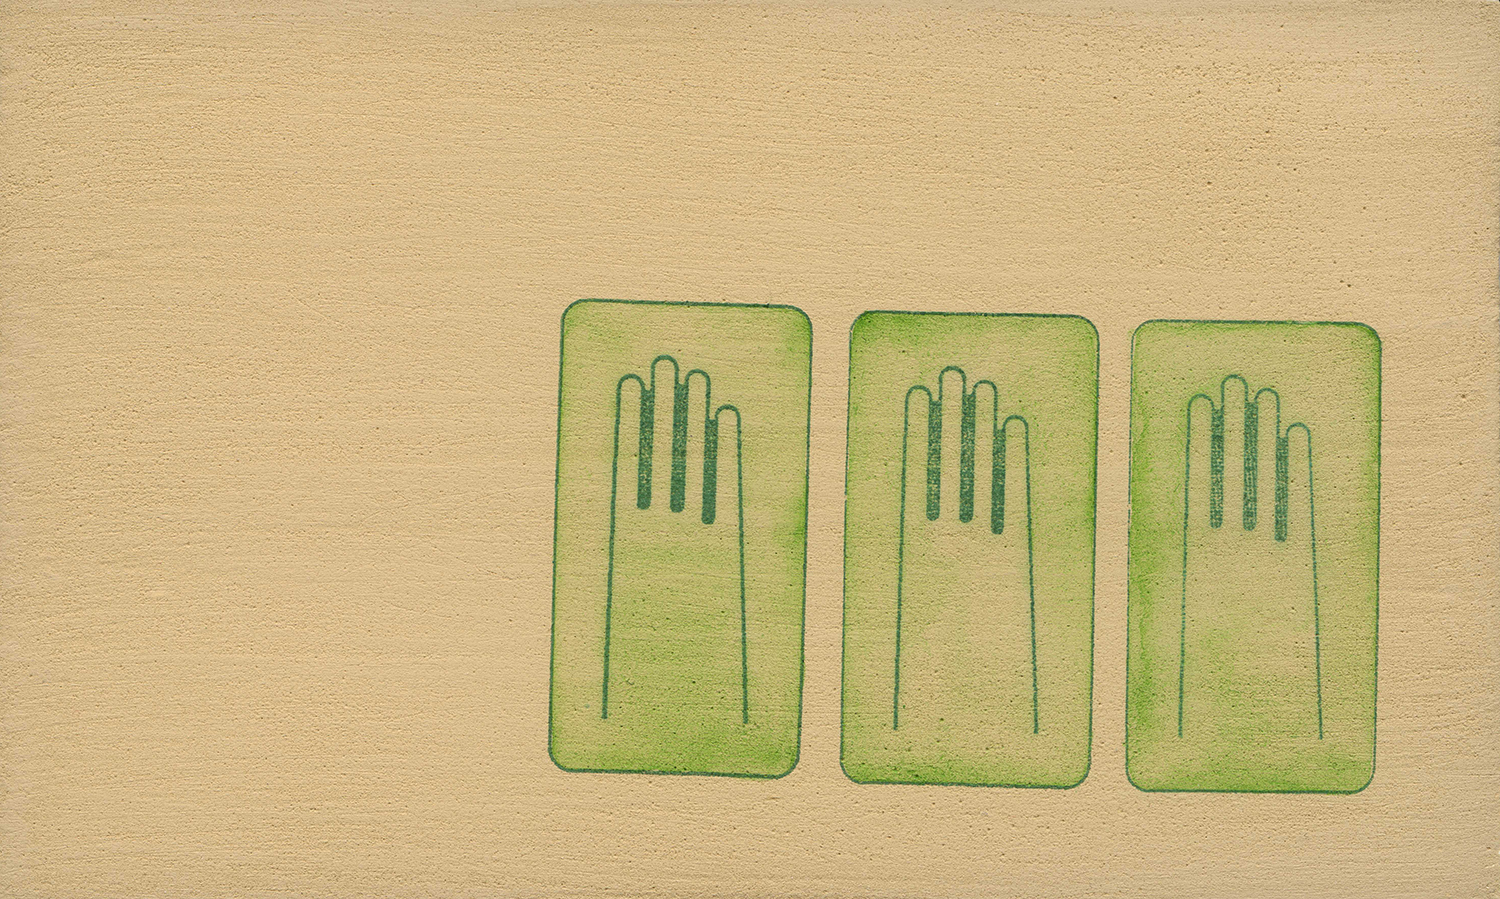 three green gloves in three rectangles on tan ground